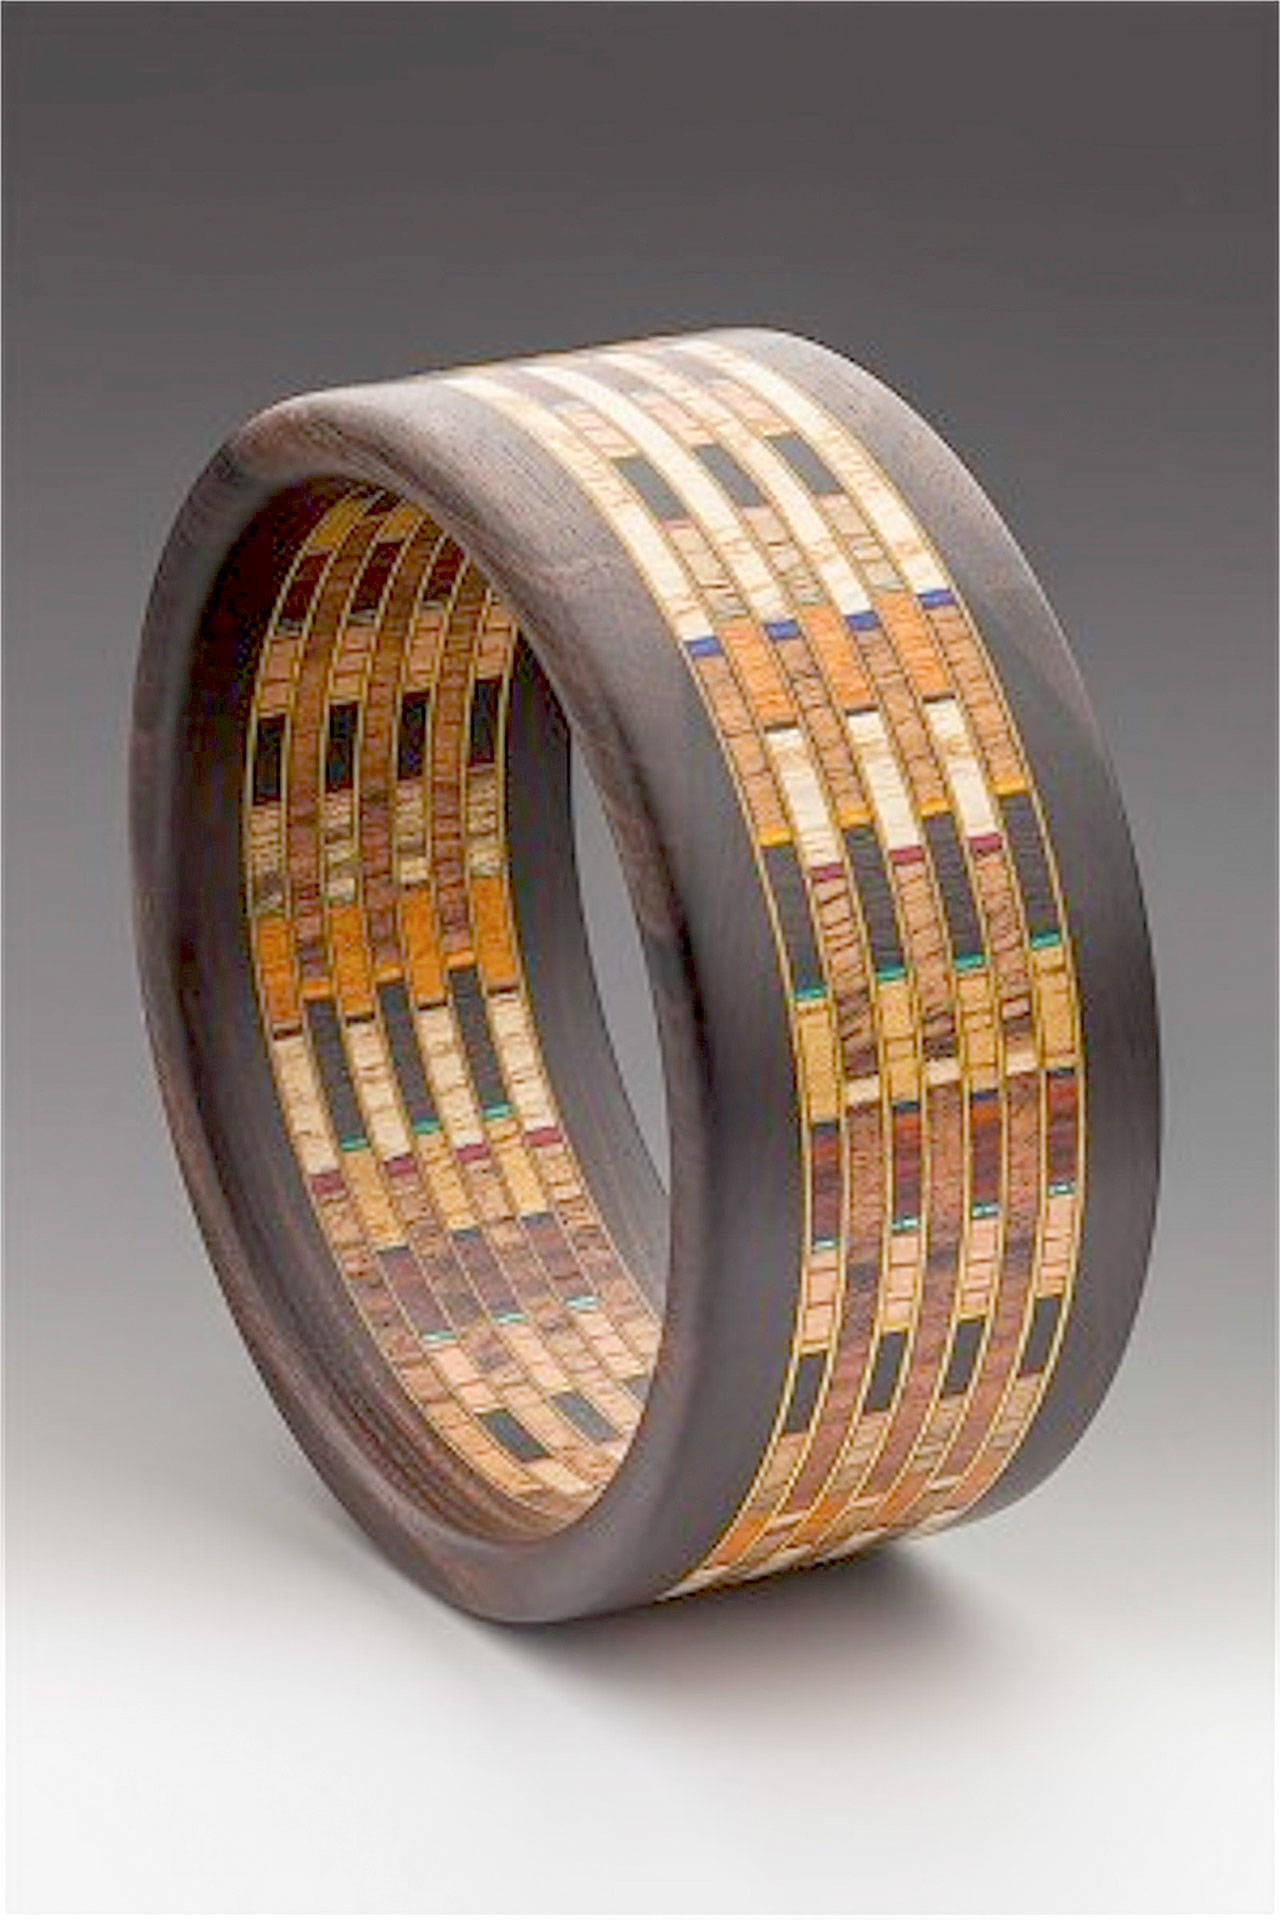 Martha Collins laminated wood pieces are featured in November at the Port Townsend Gallery.